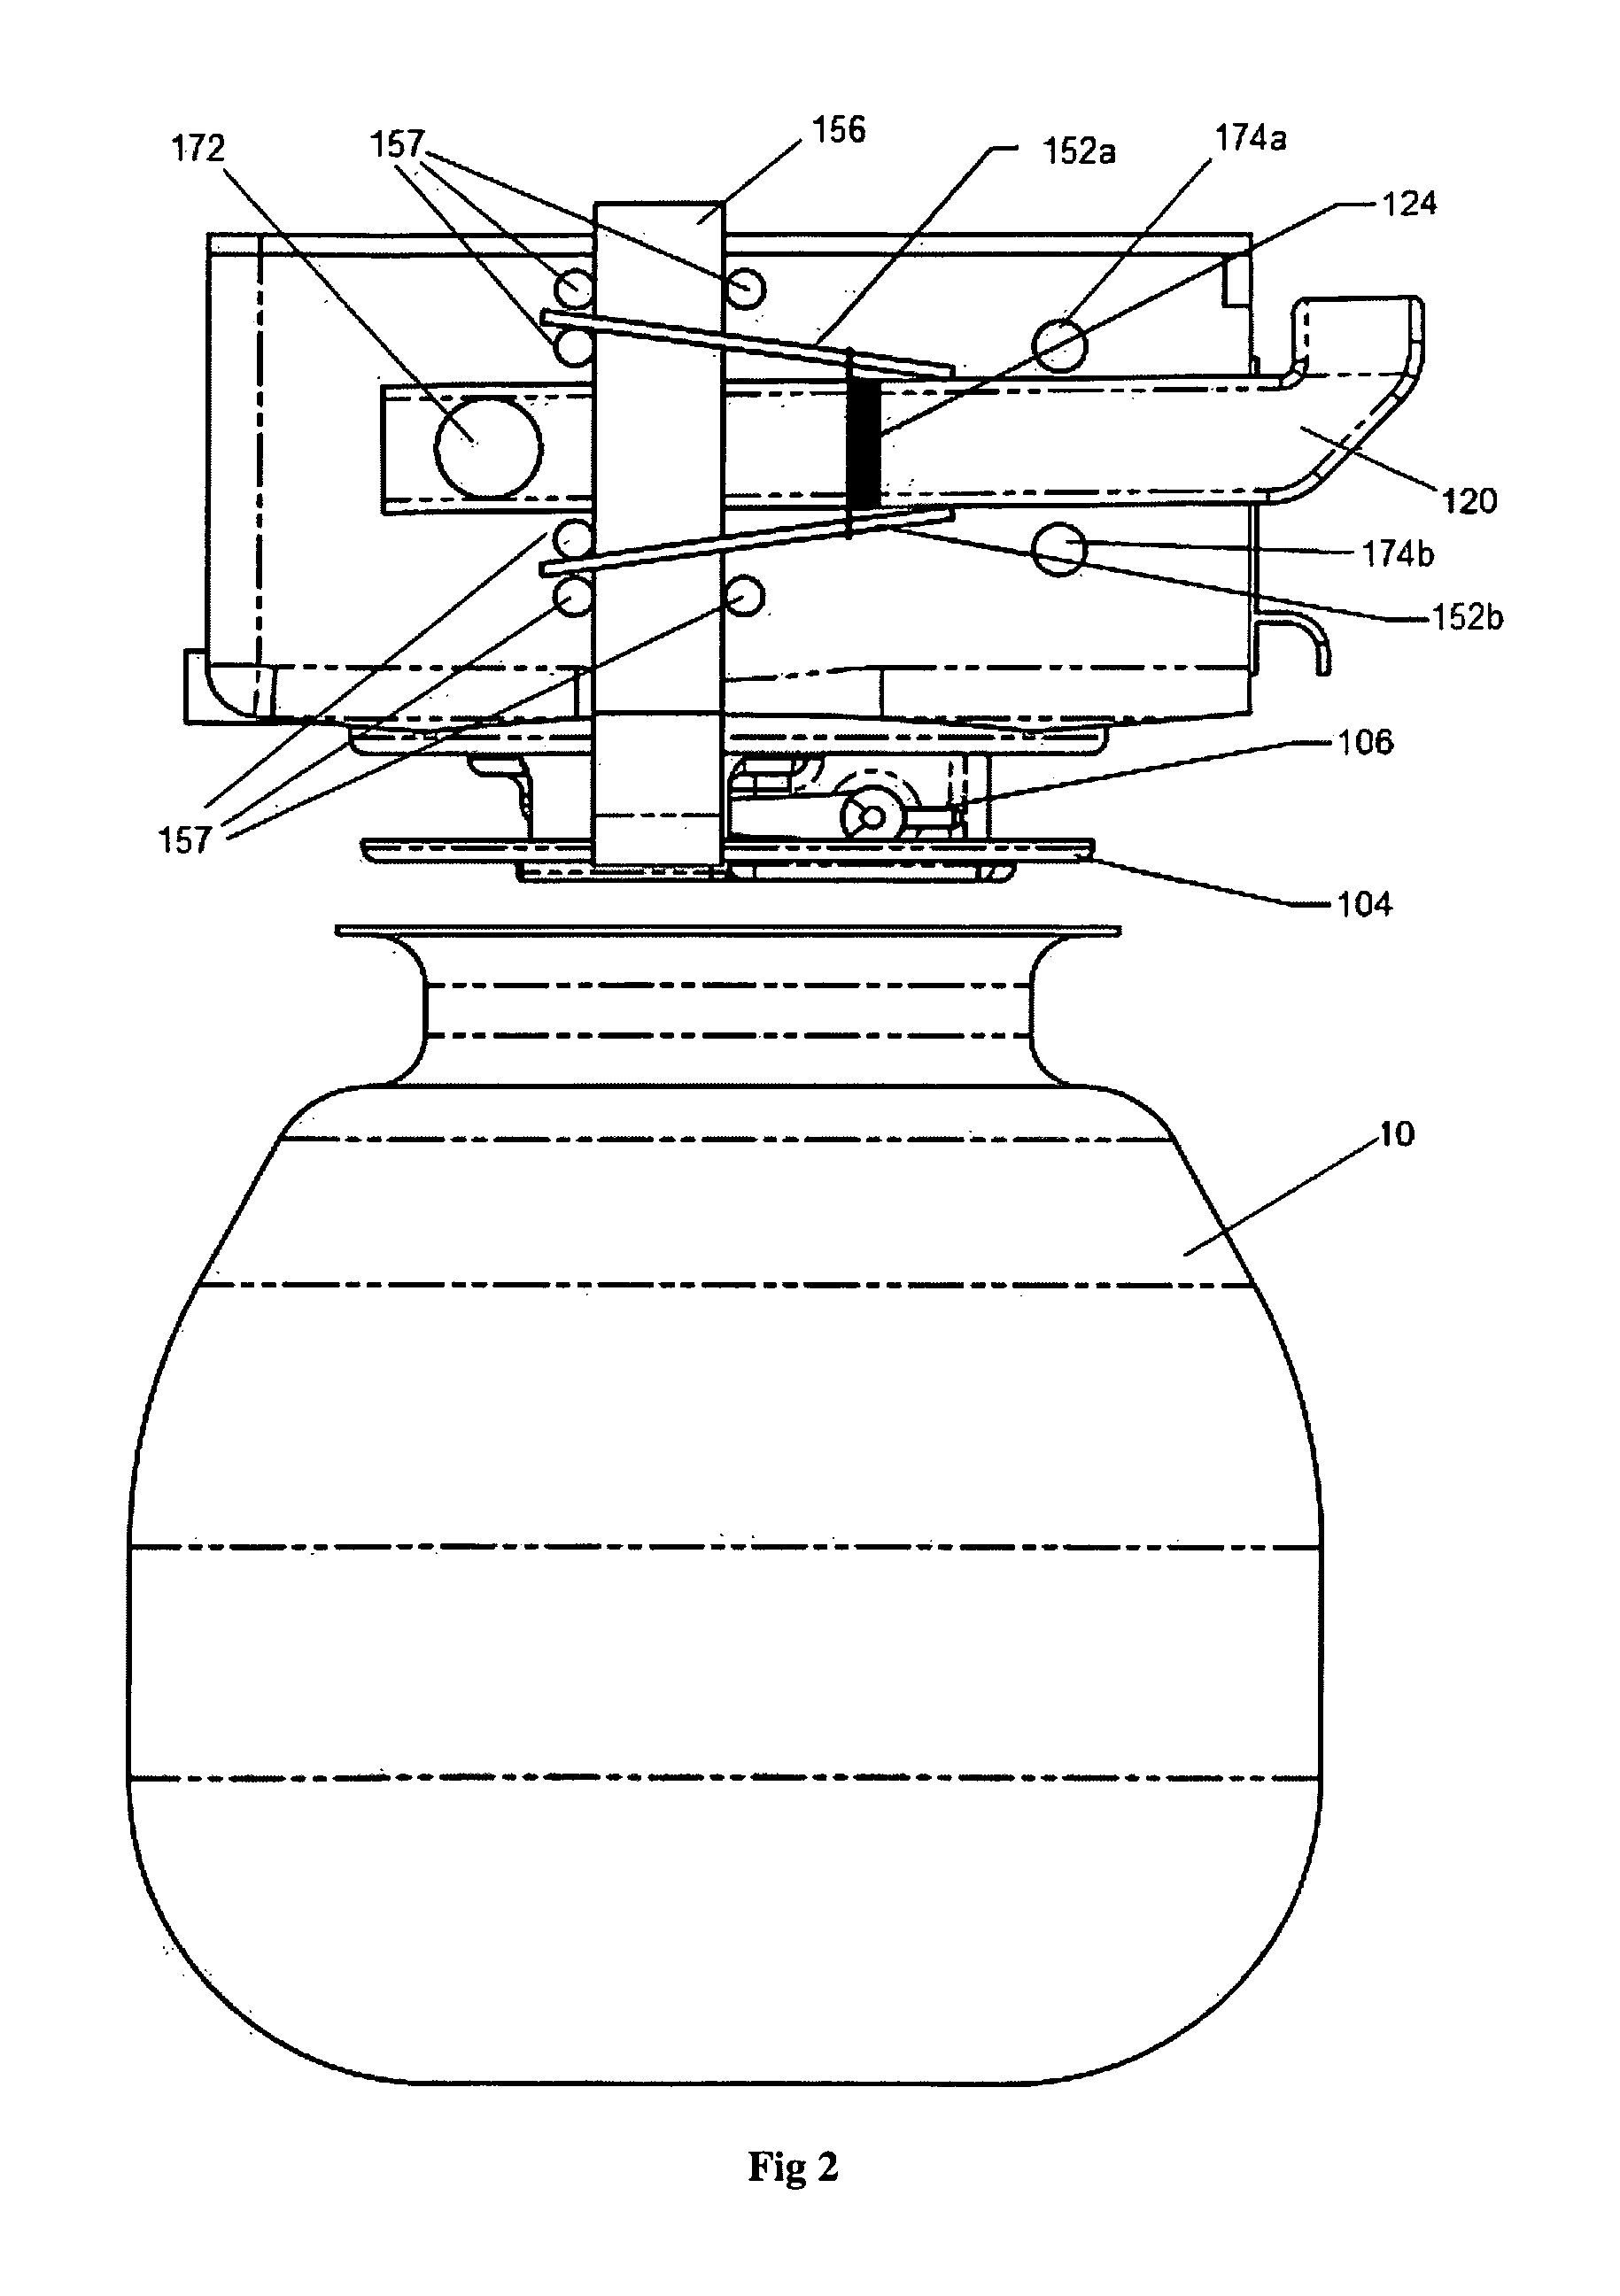 Sensor head and brew cup for a beverage brewing device